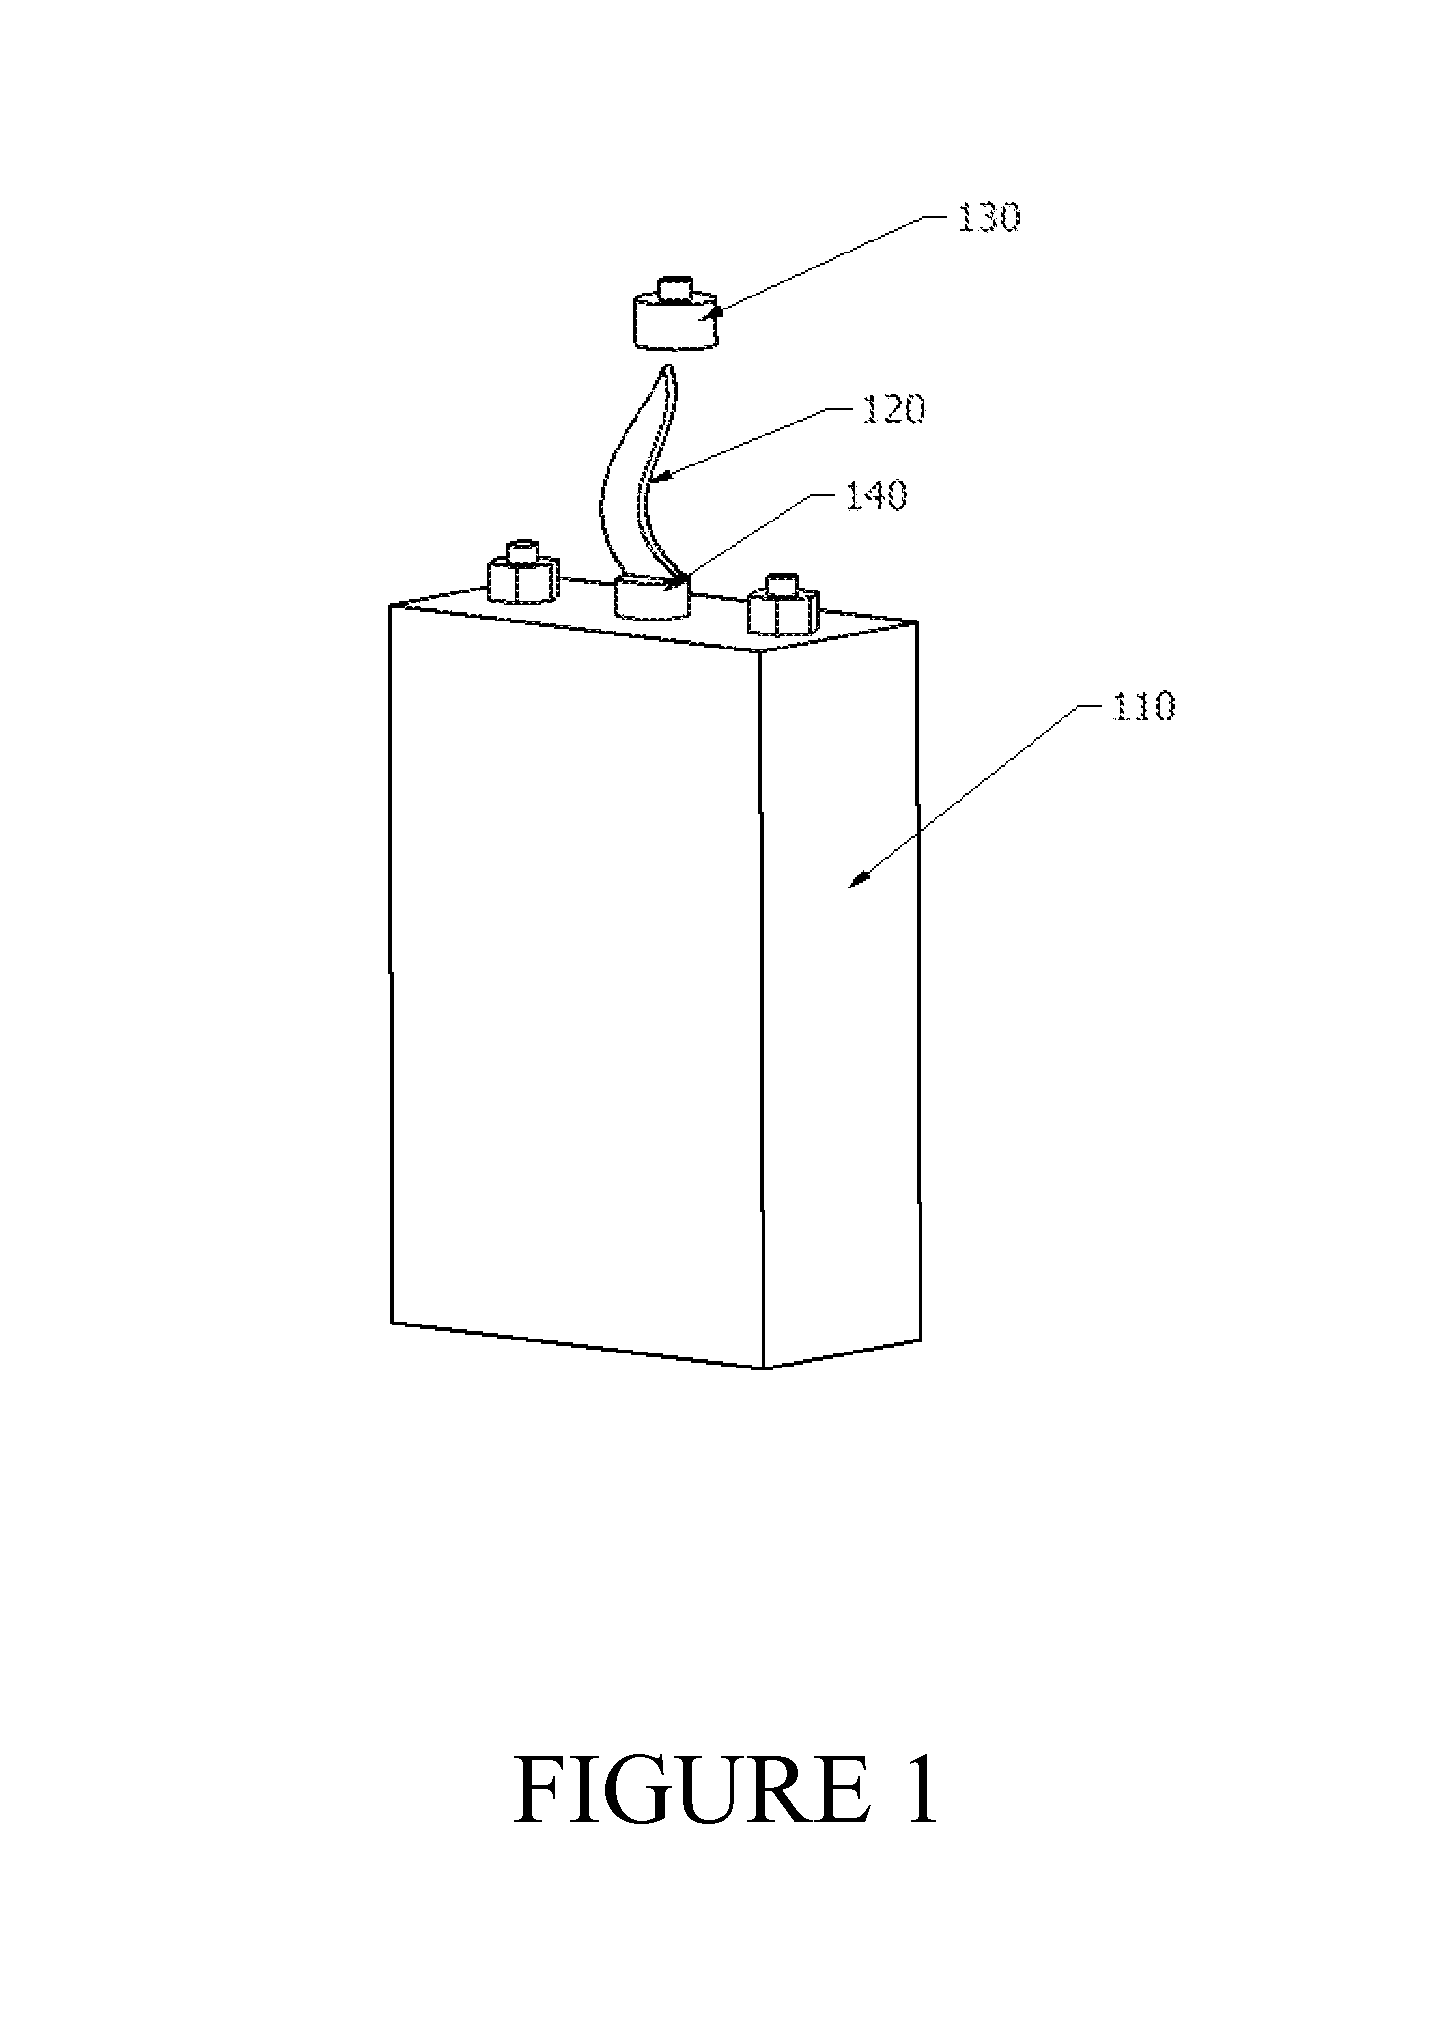 Method of detecting lithium-ion cell damage via vapor detection